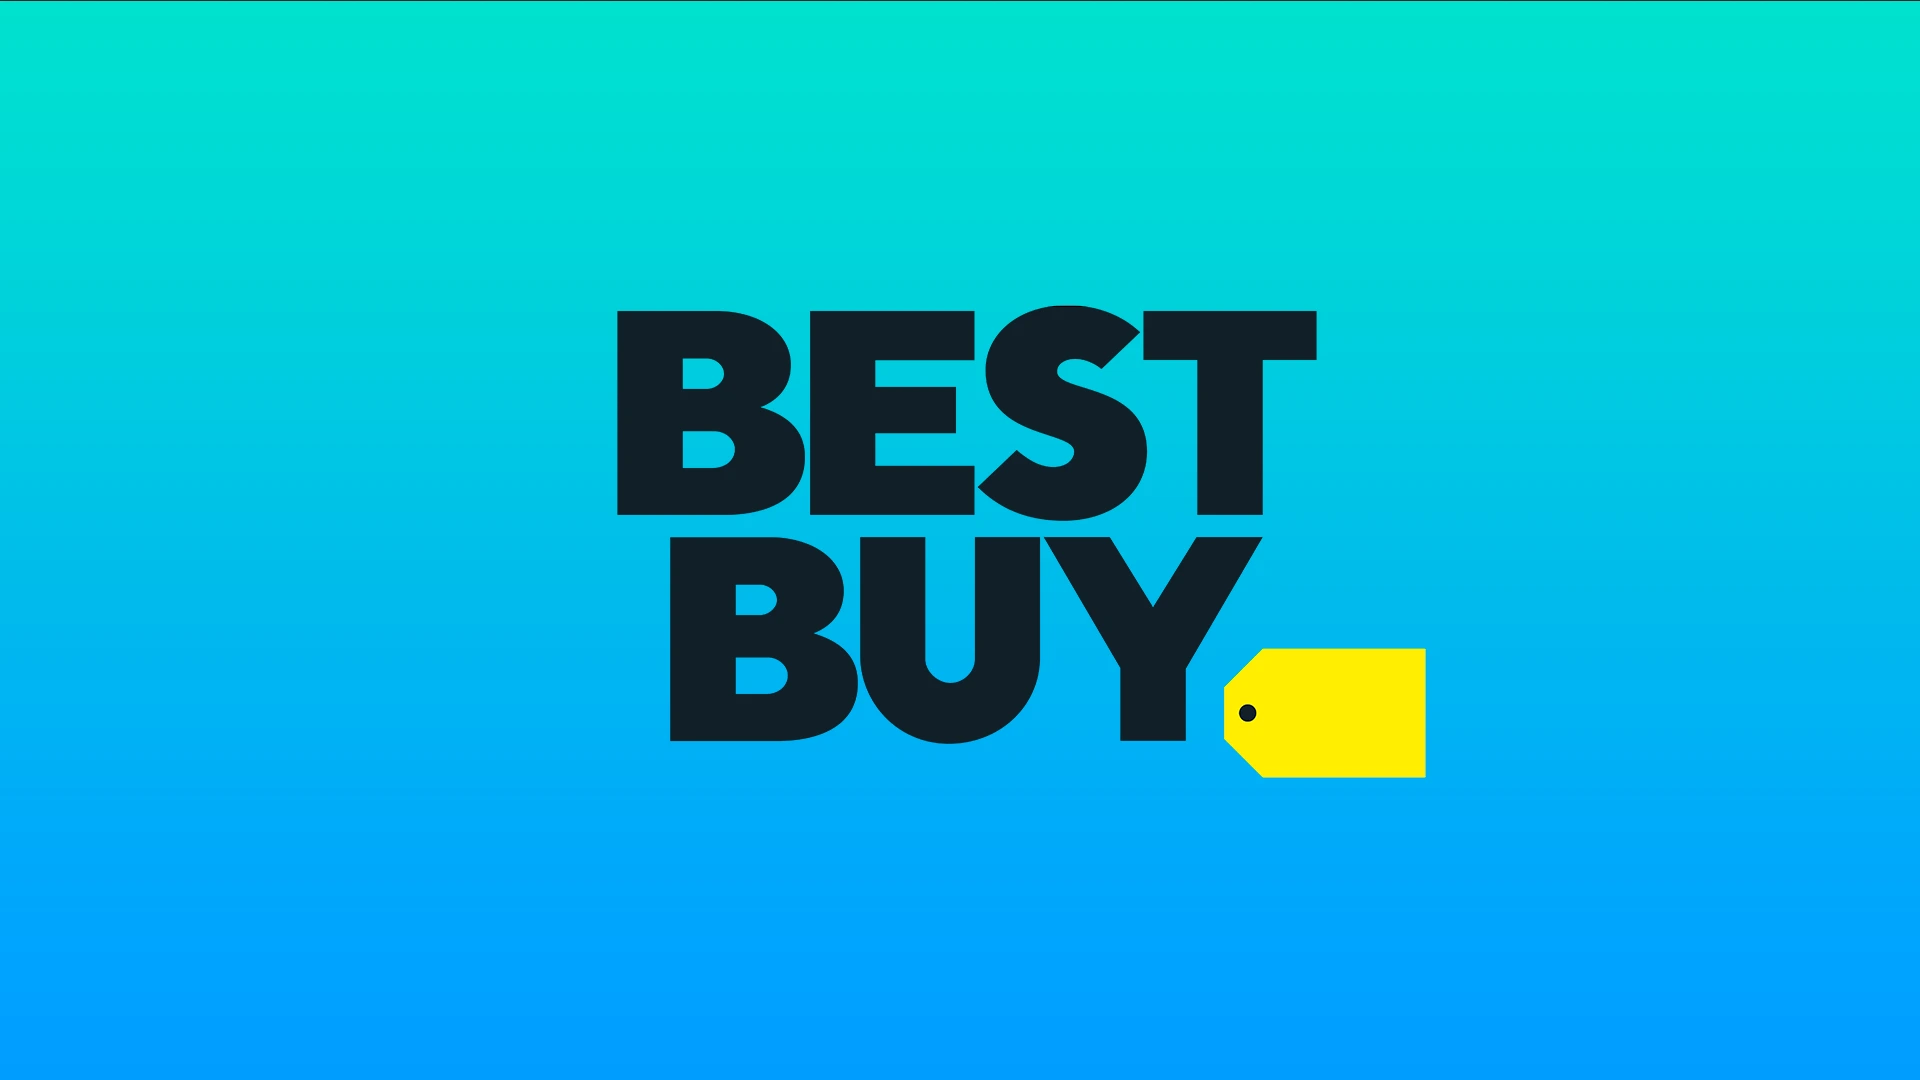 Best Buy will launch new small format stores